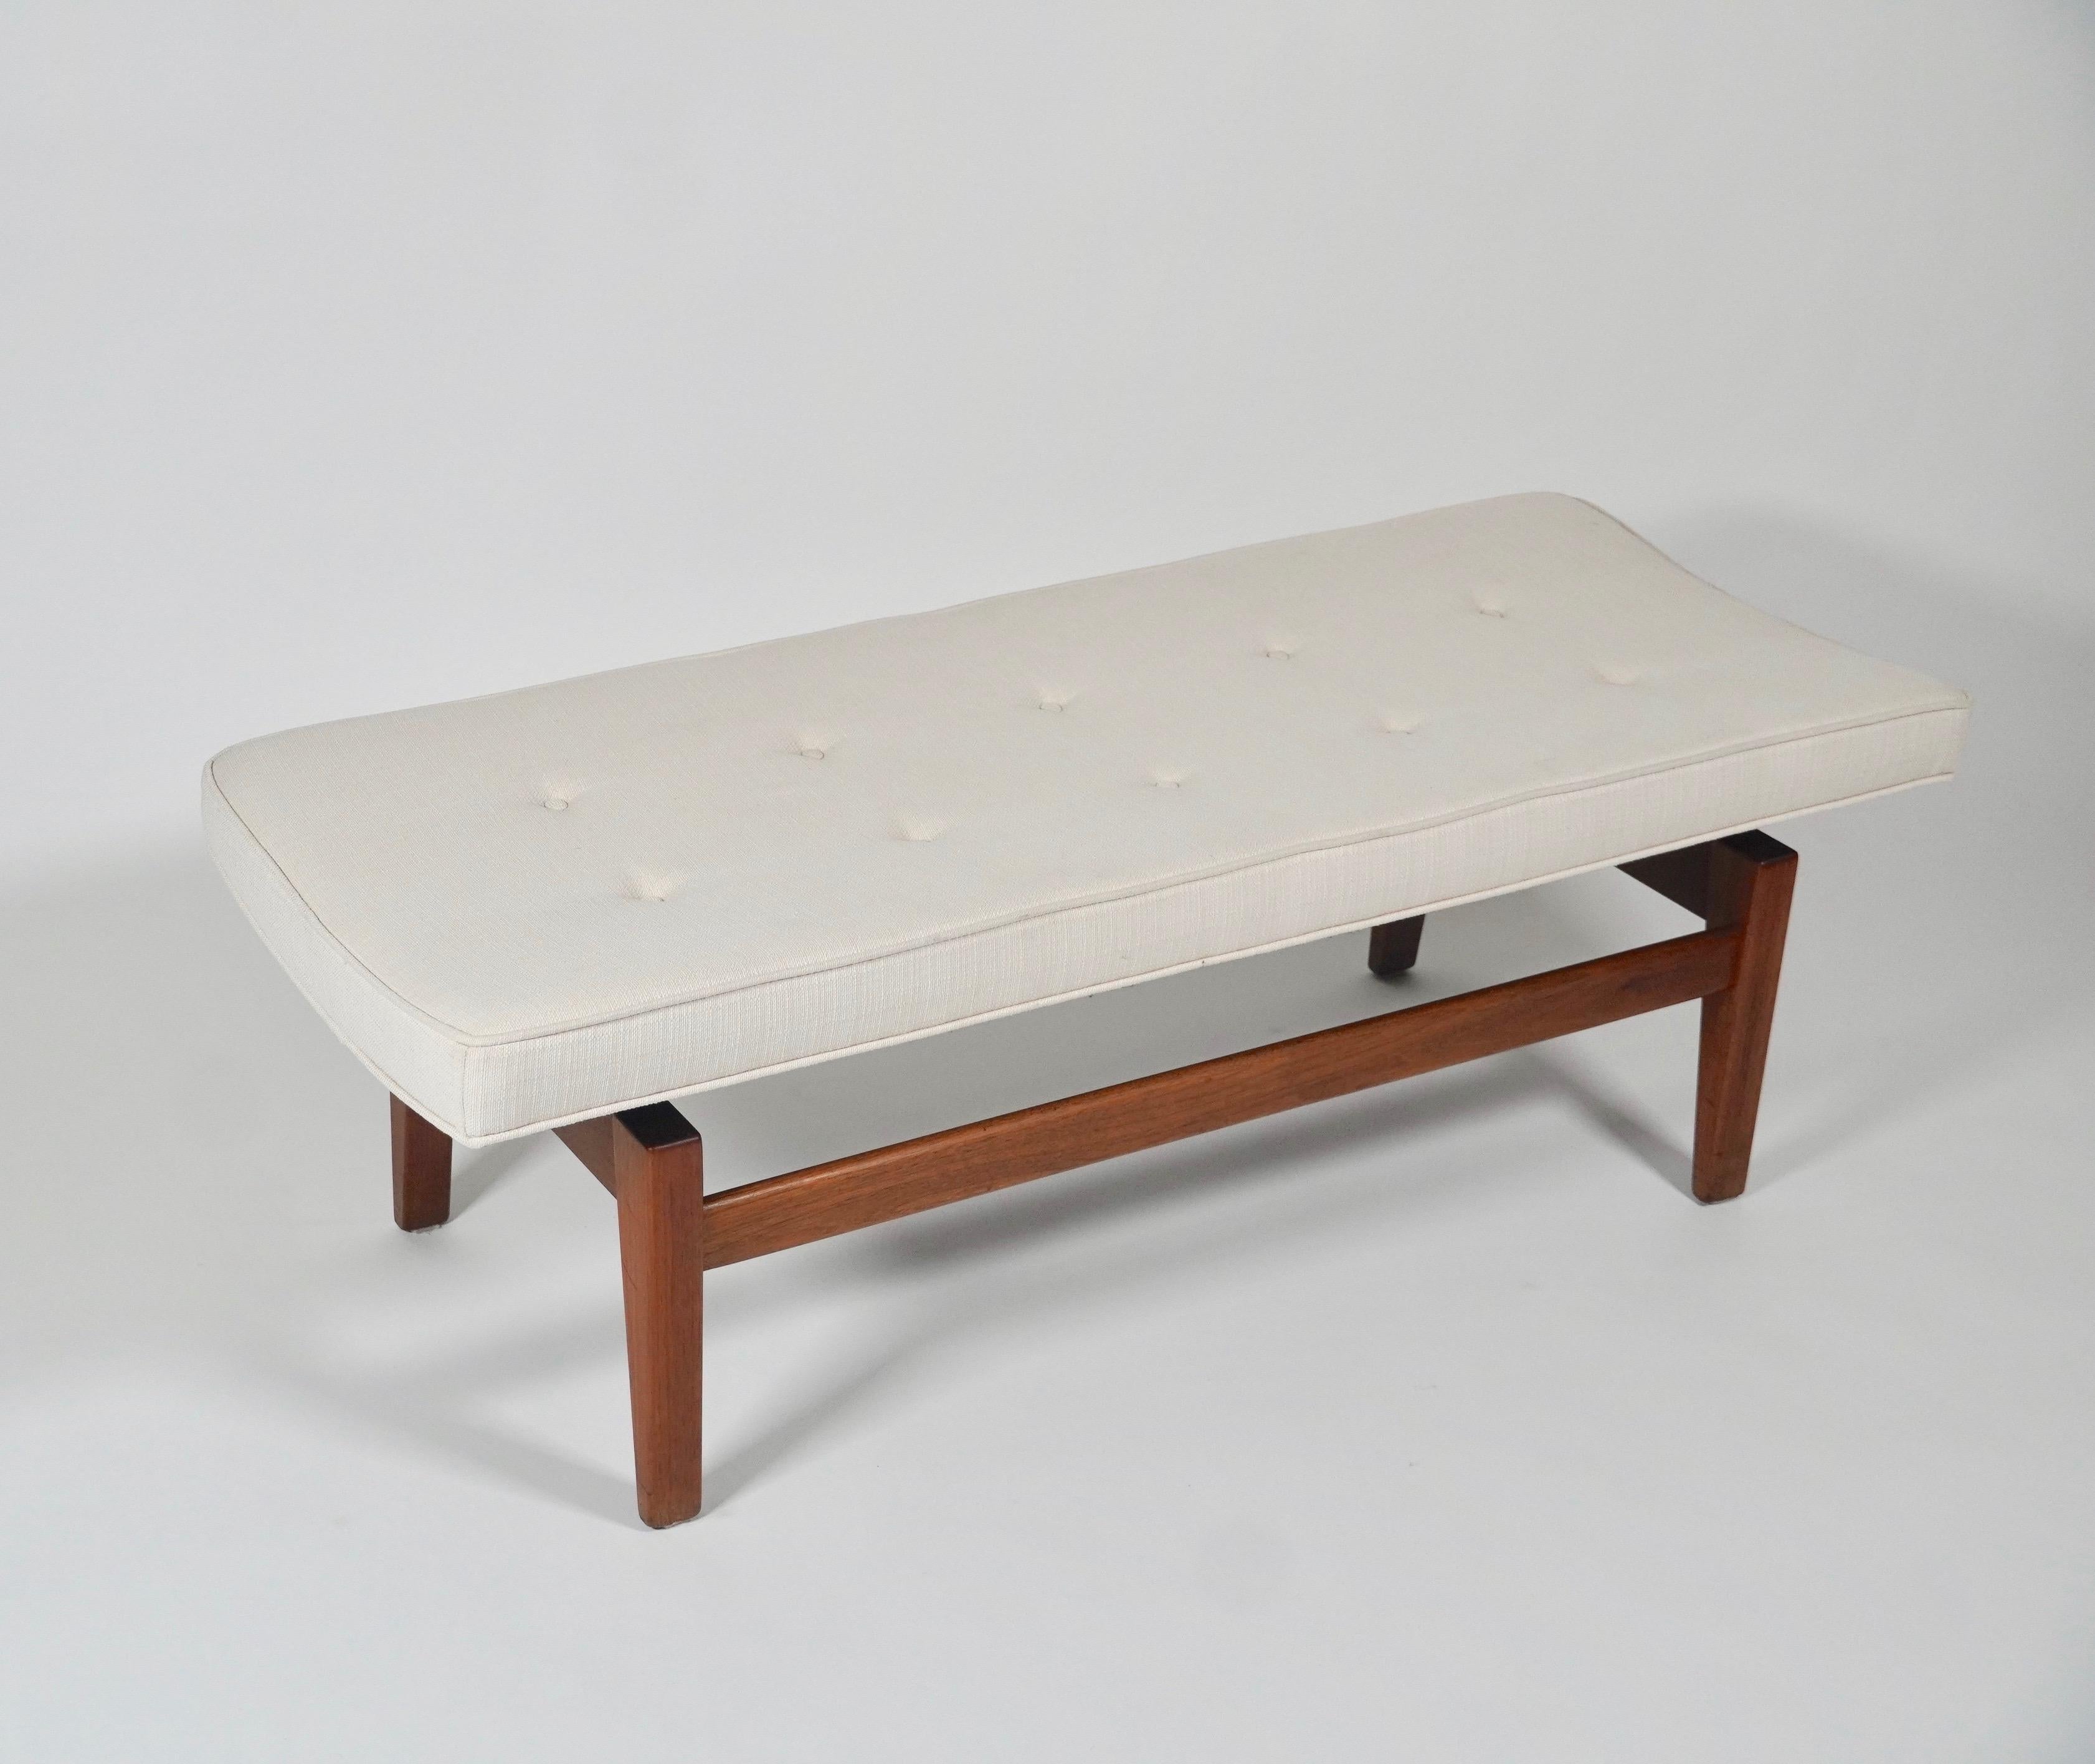 Floating bench with silk upholstery and walnut frame, designed by Danish American designer Jens Risom (1916-2016) for his company Jens Risom Design Inc. The bench is designed to create the effect of it floating, along with a slight curve along the